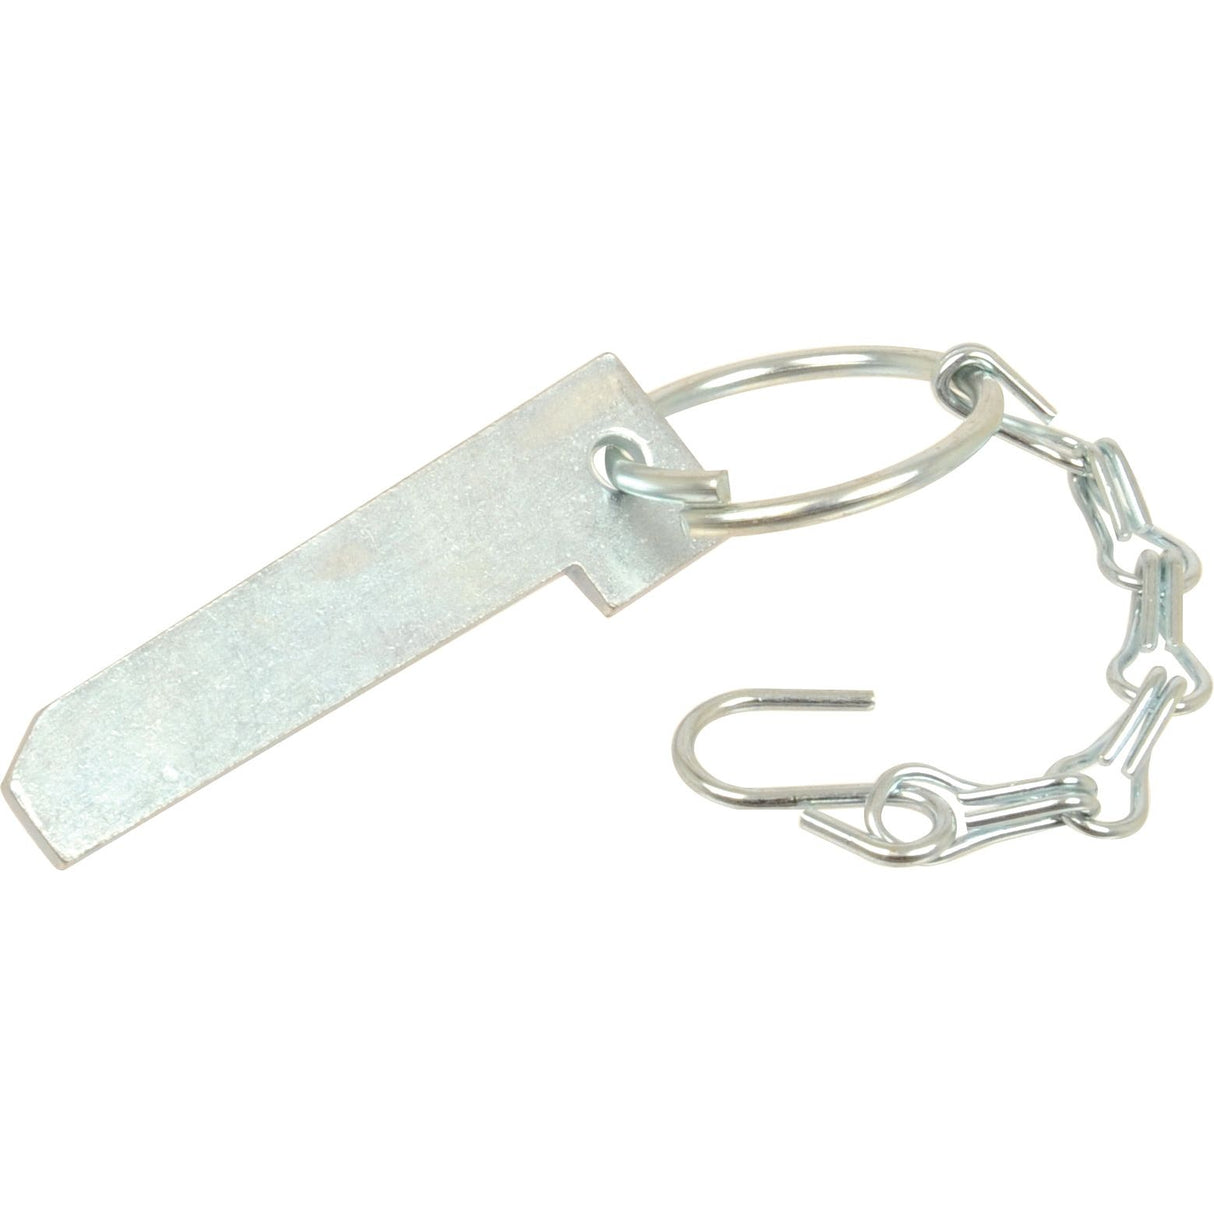 Flat Cotter Pin with Chain
 - S.4786 - Farming Parts